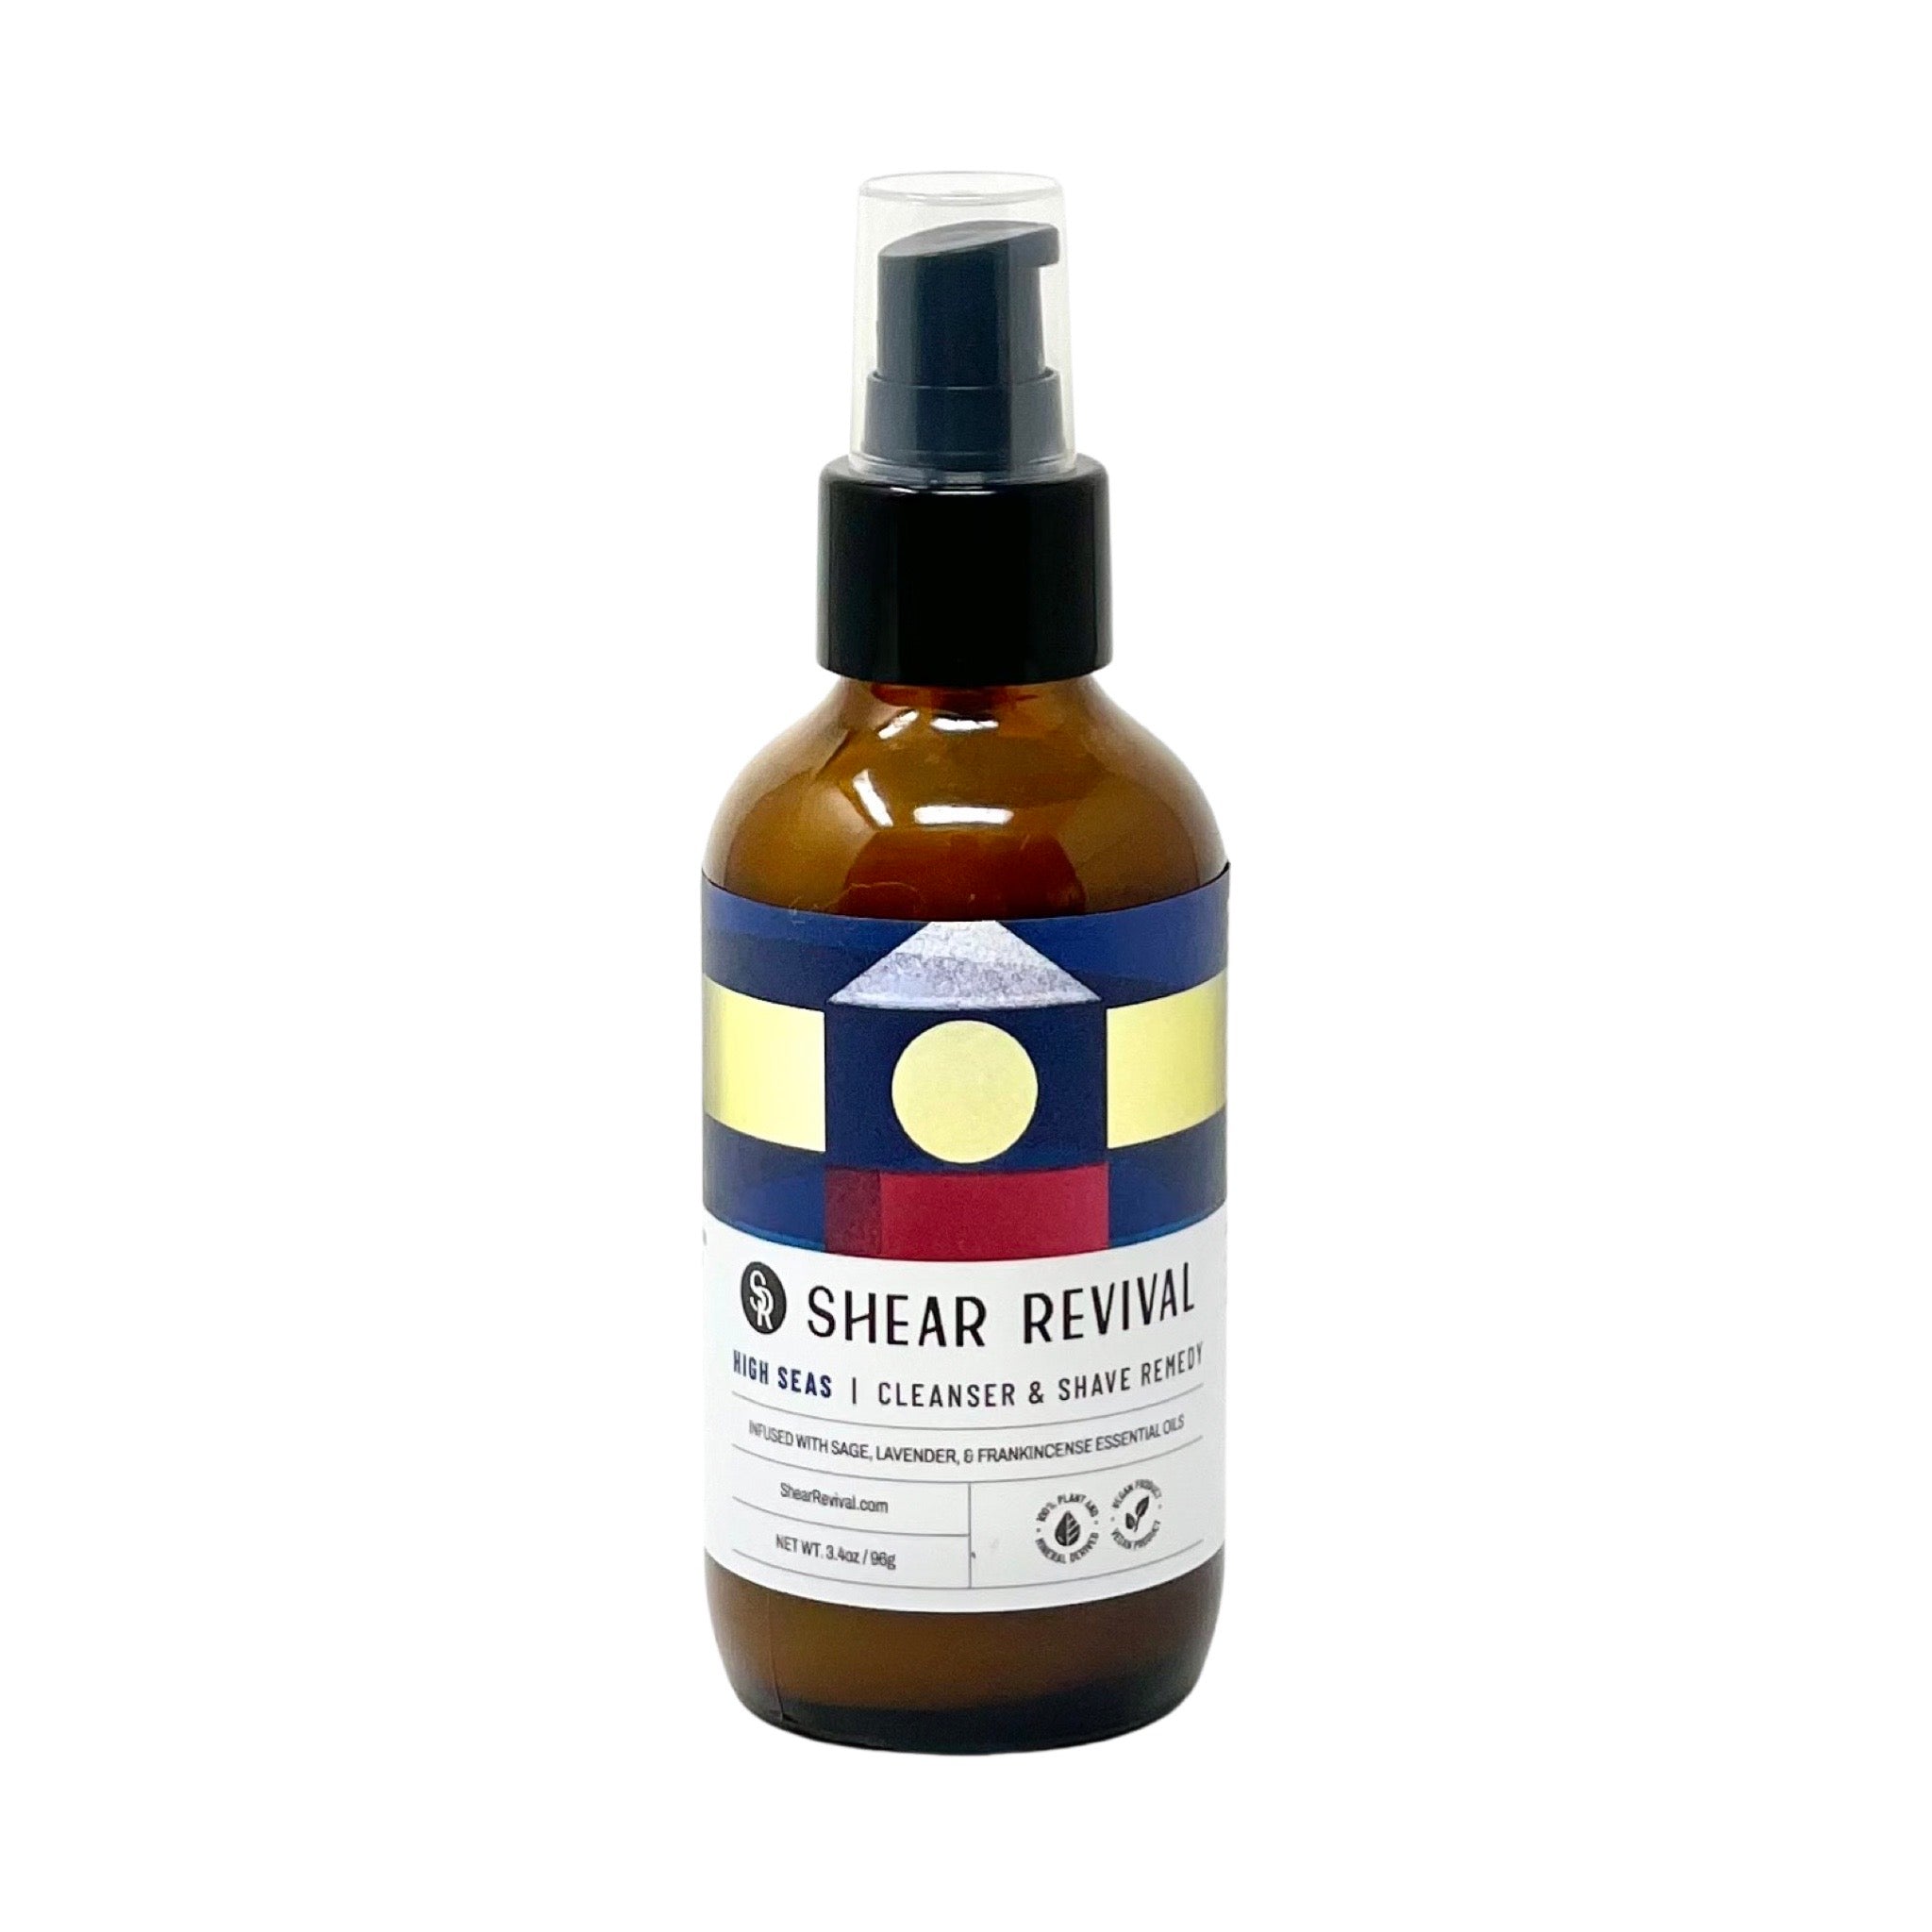 High Seas Cleanser + Shave Remedy